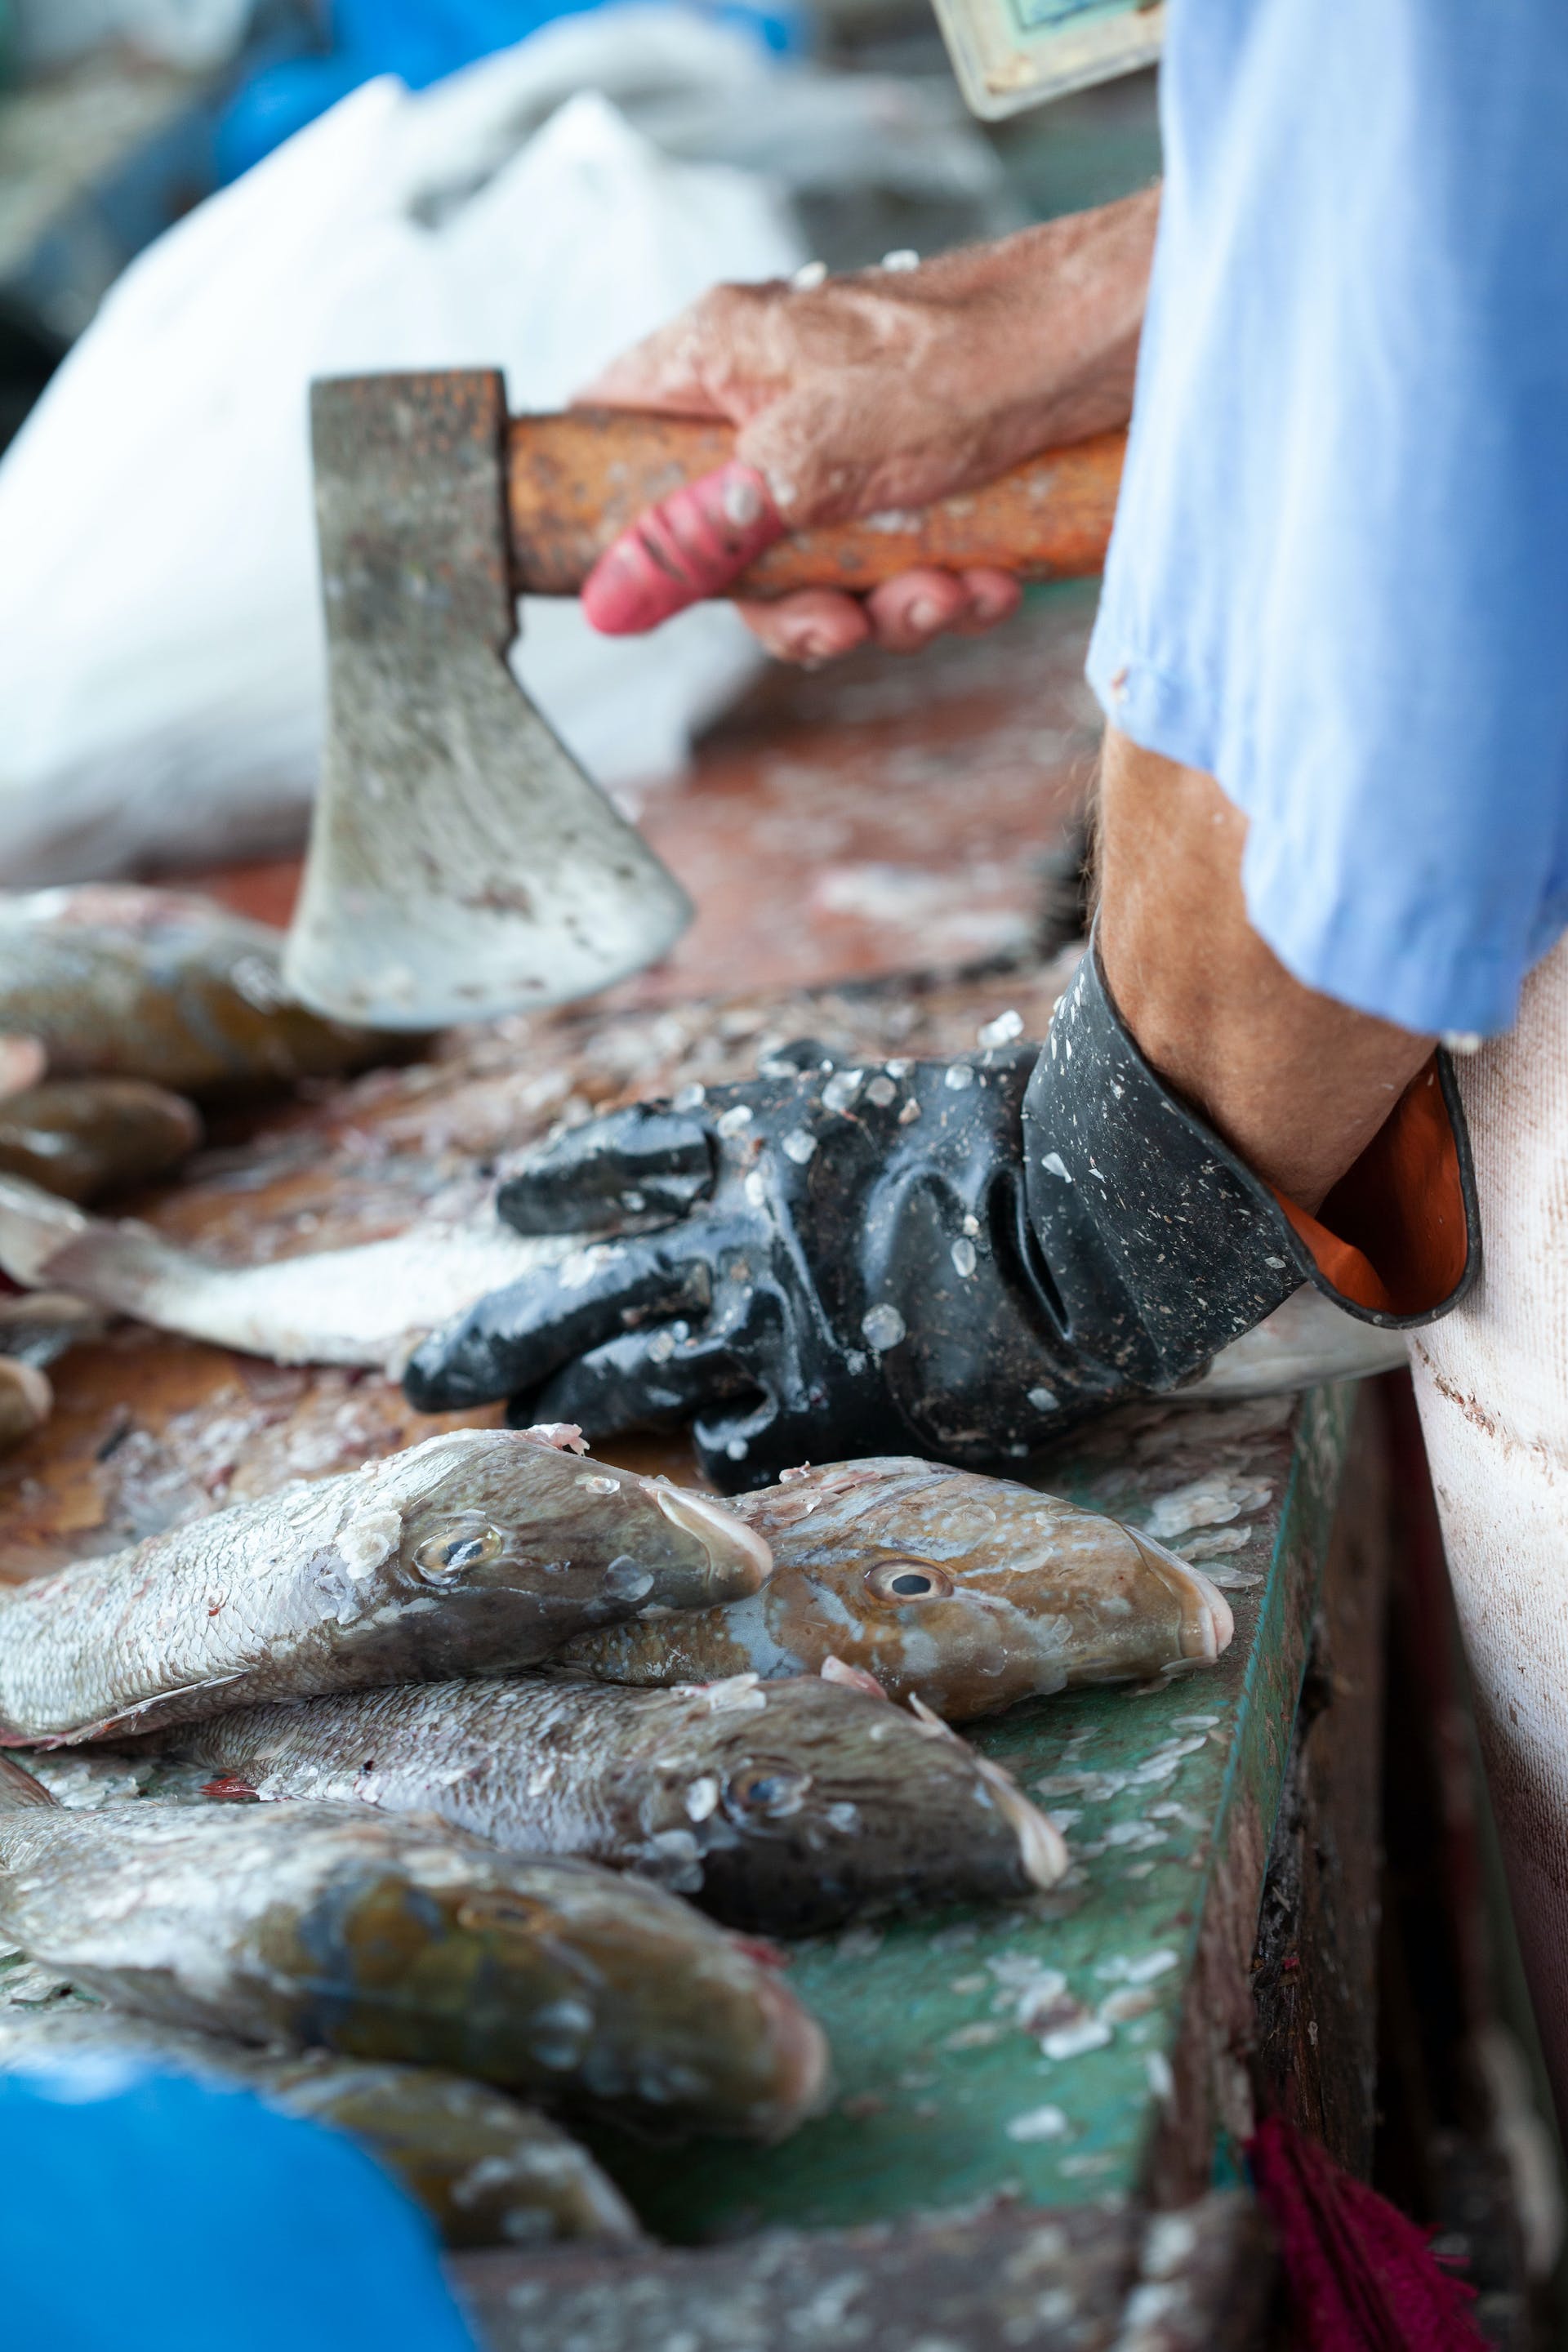 A person chopping fish | Source: Pexels